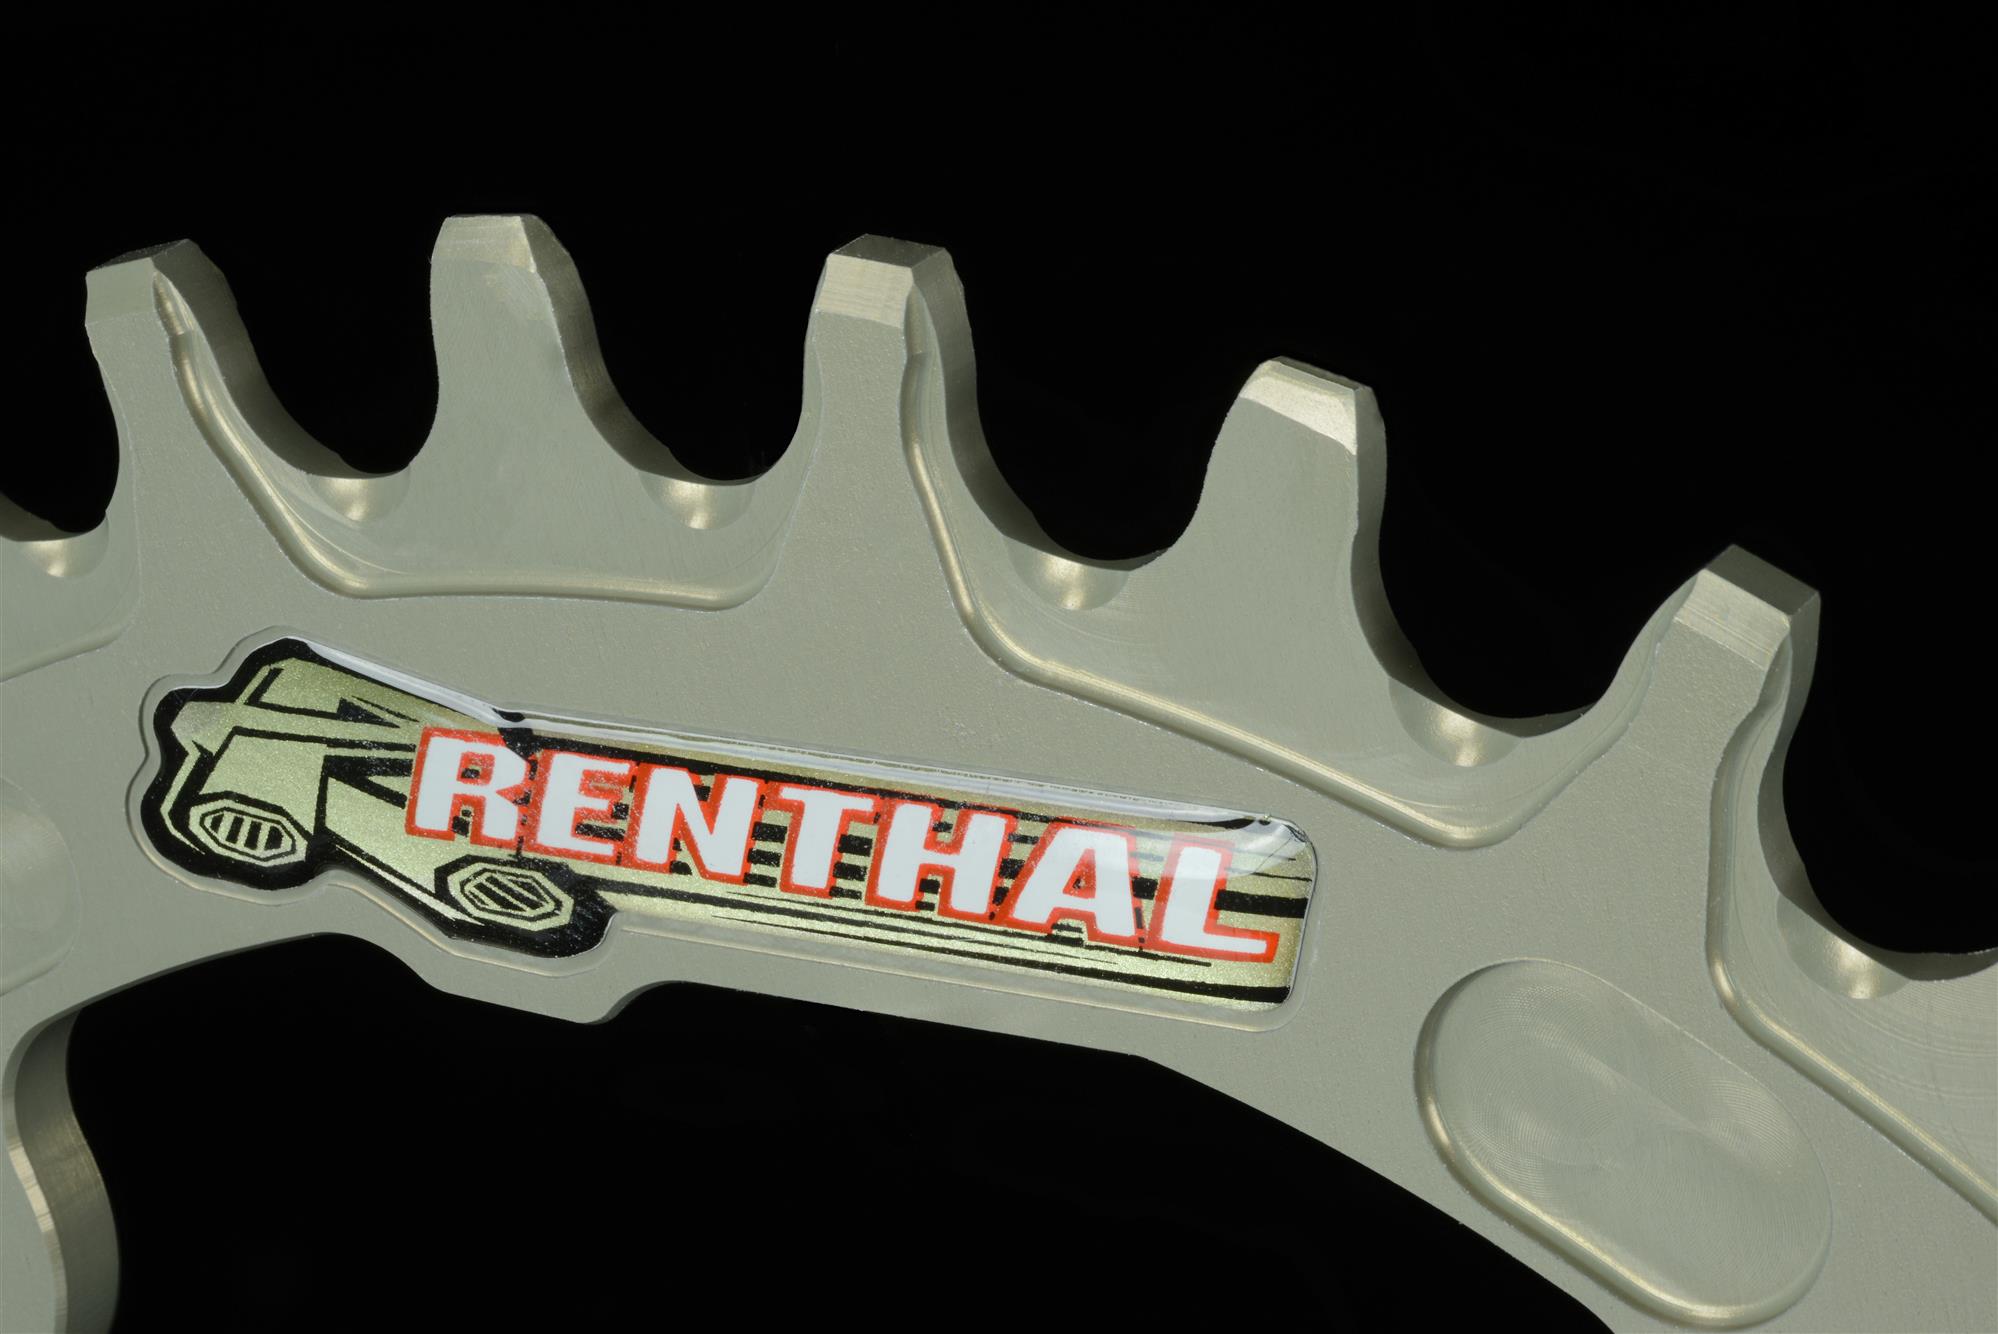 New tooth profile for Renthal drive rings.